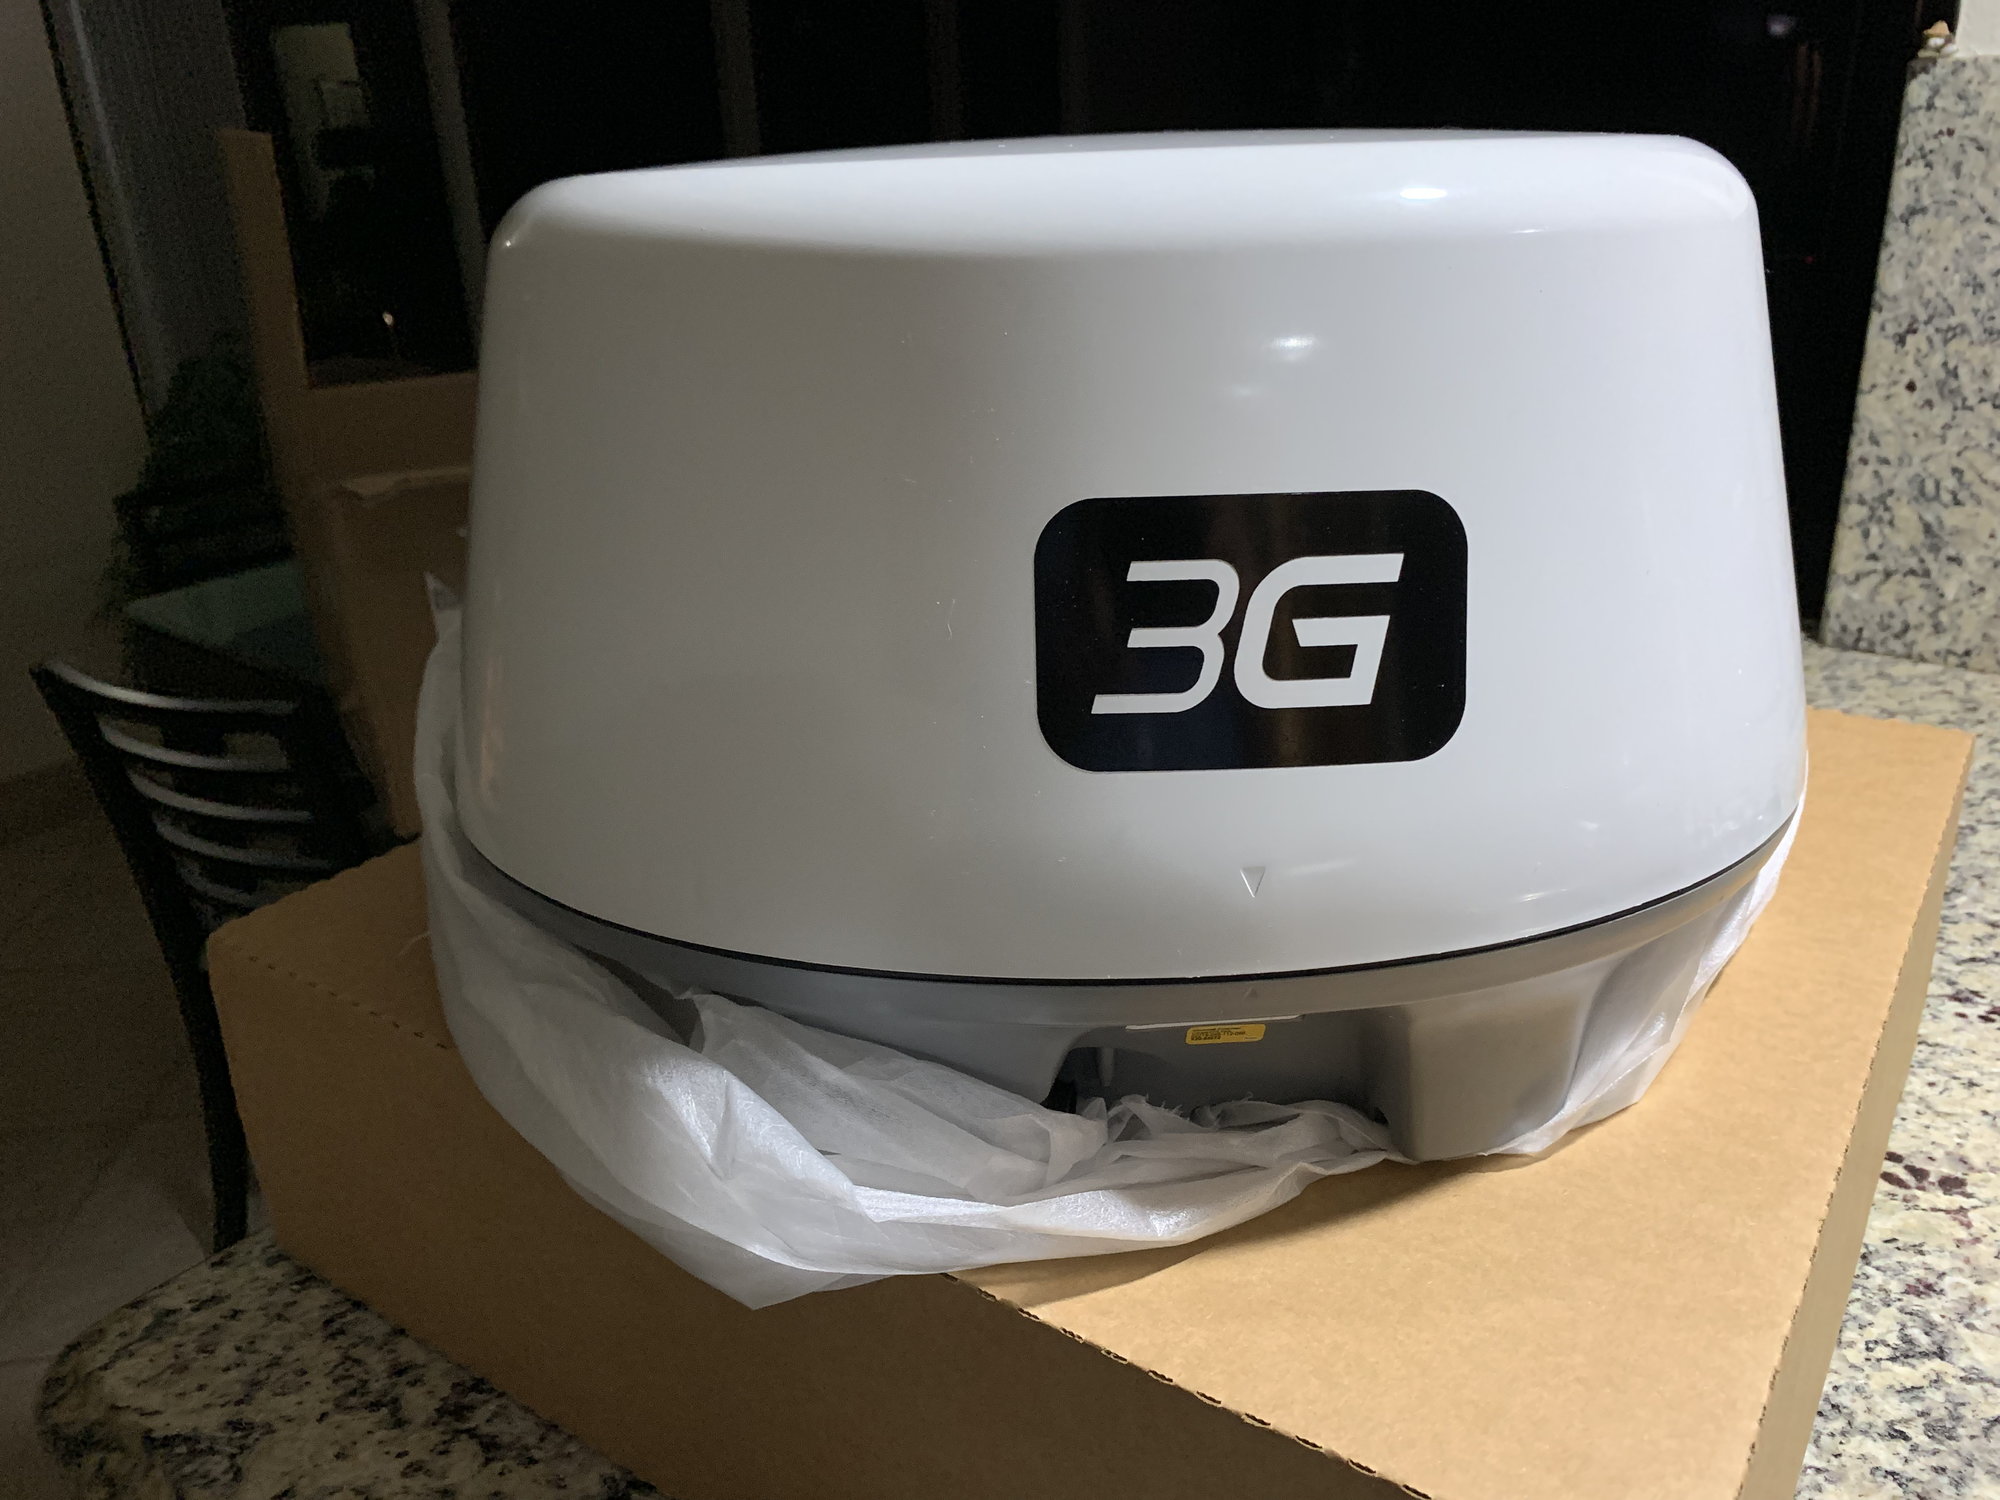 3G Radar Low Price vs 4G - The Hull Truth - Boating and Fishing Forum